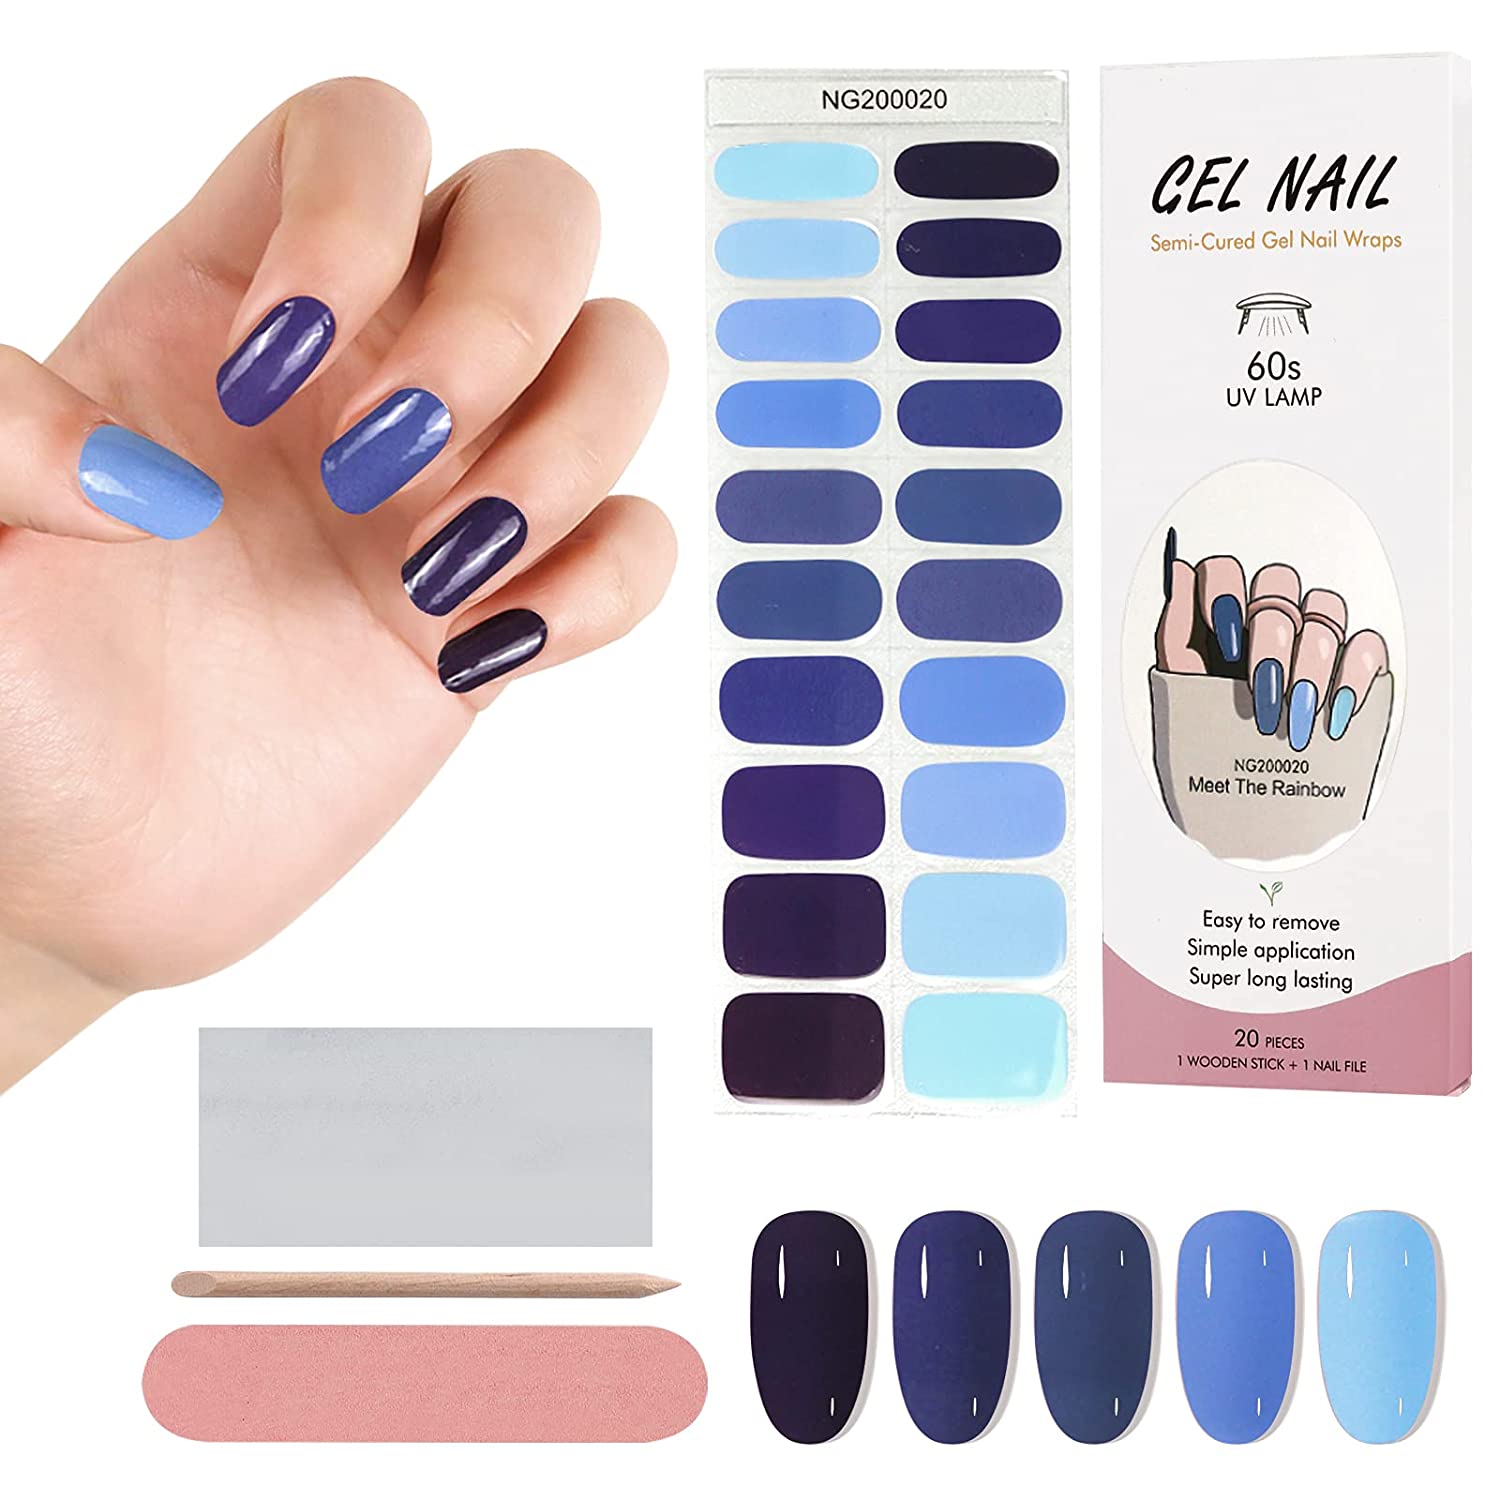 Christmas Gel Nail Wraps No UV light Required 20 Strips Buy 3 get 1 free!